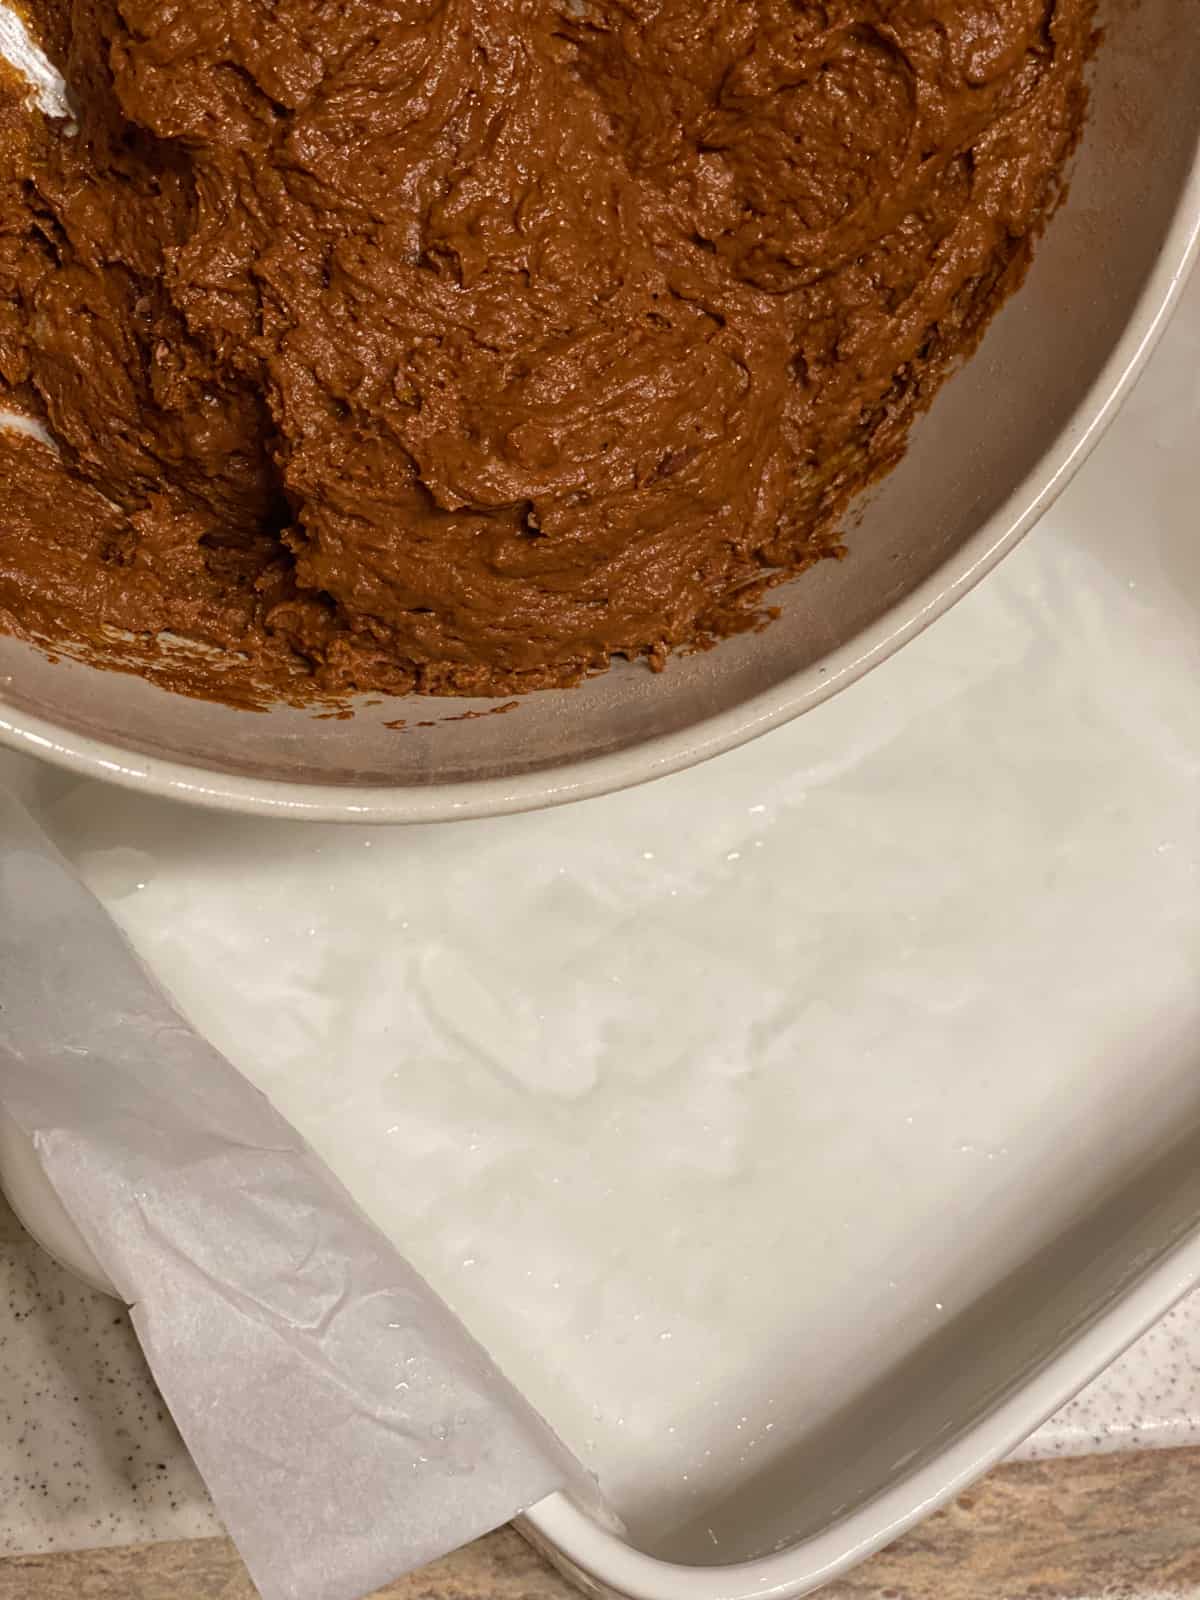 process shot of pouring brownie batter into baking pan